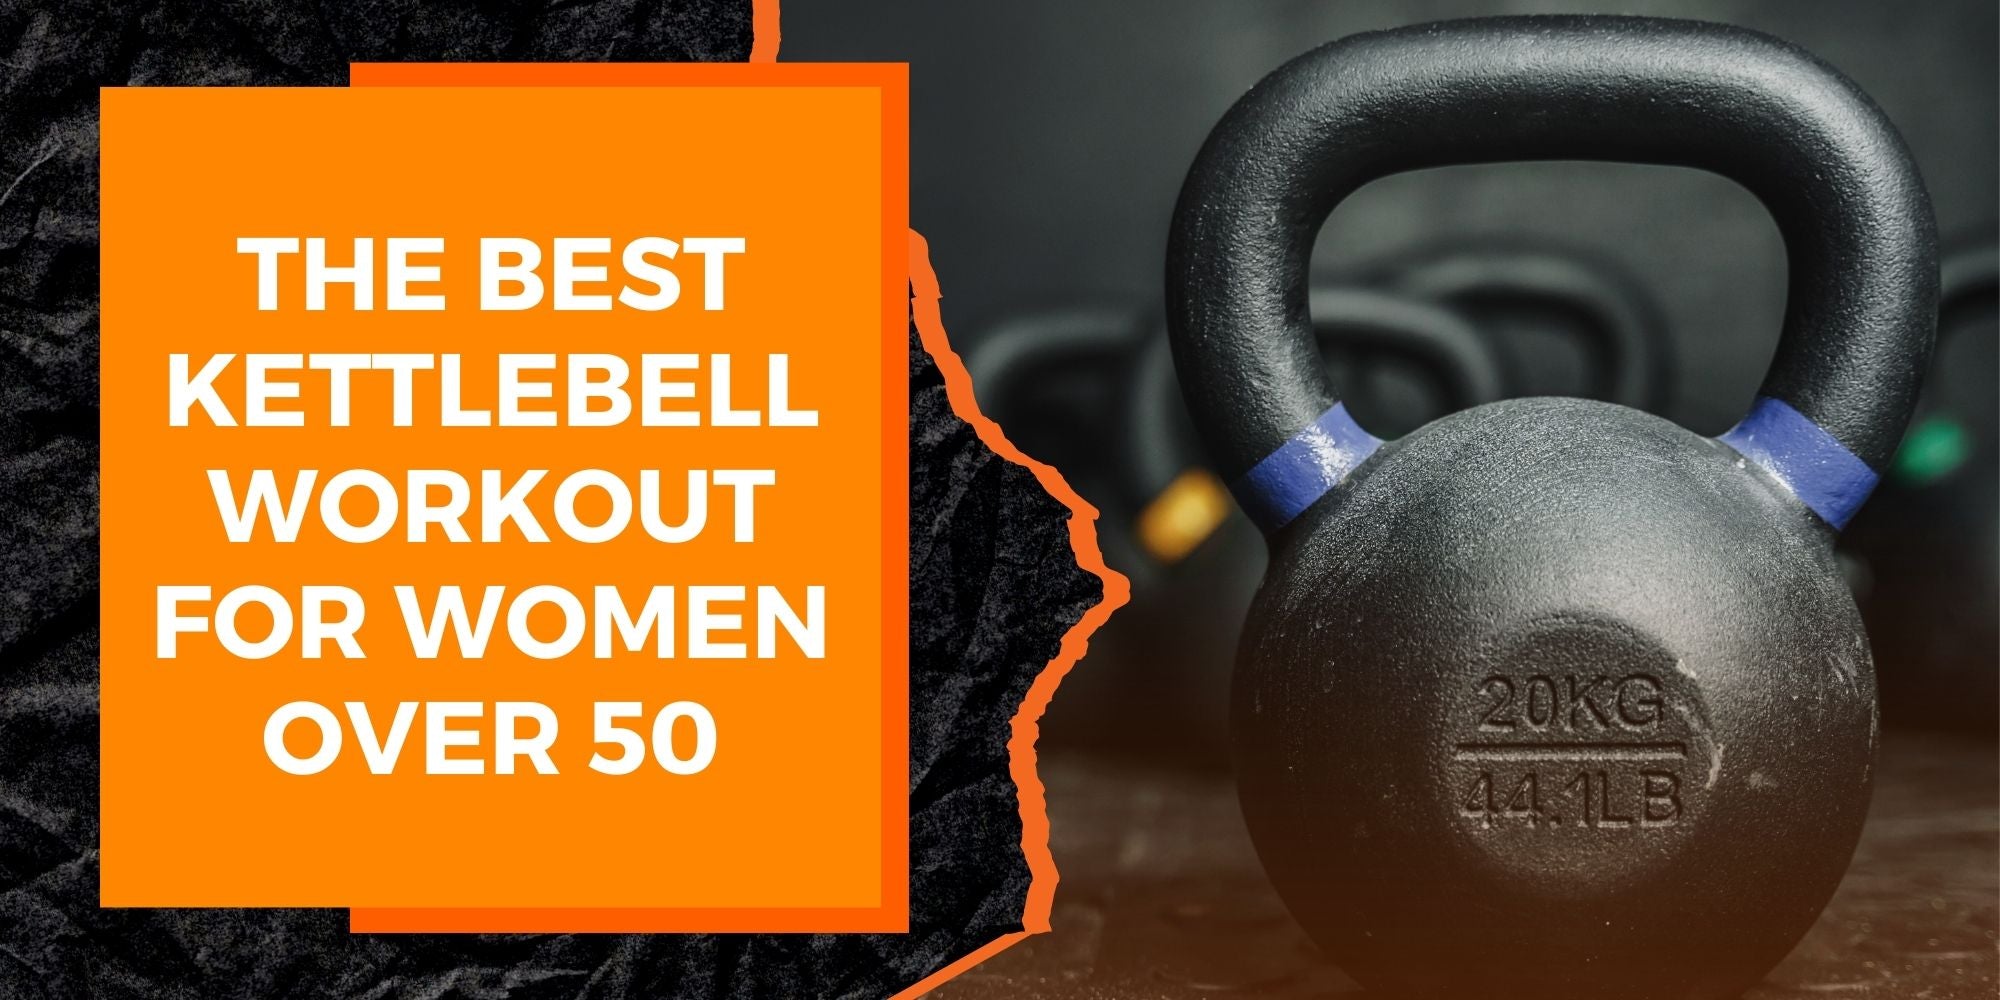 The Best Kettlebell Workout for Women Over 50